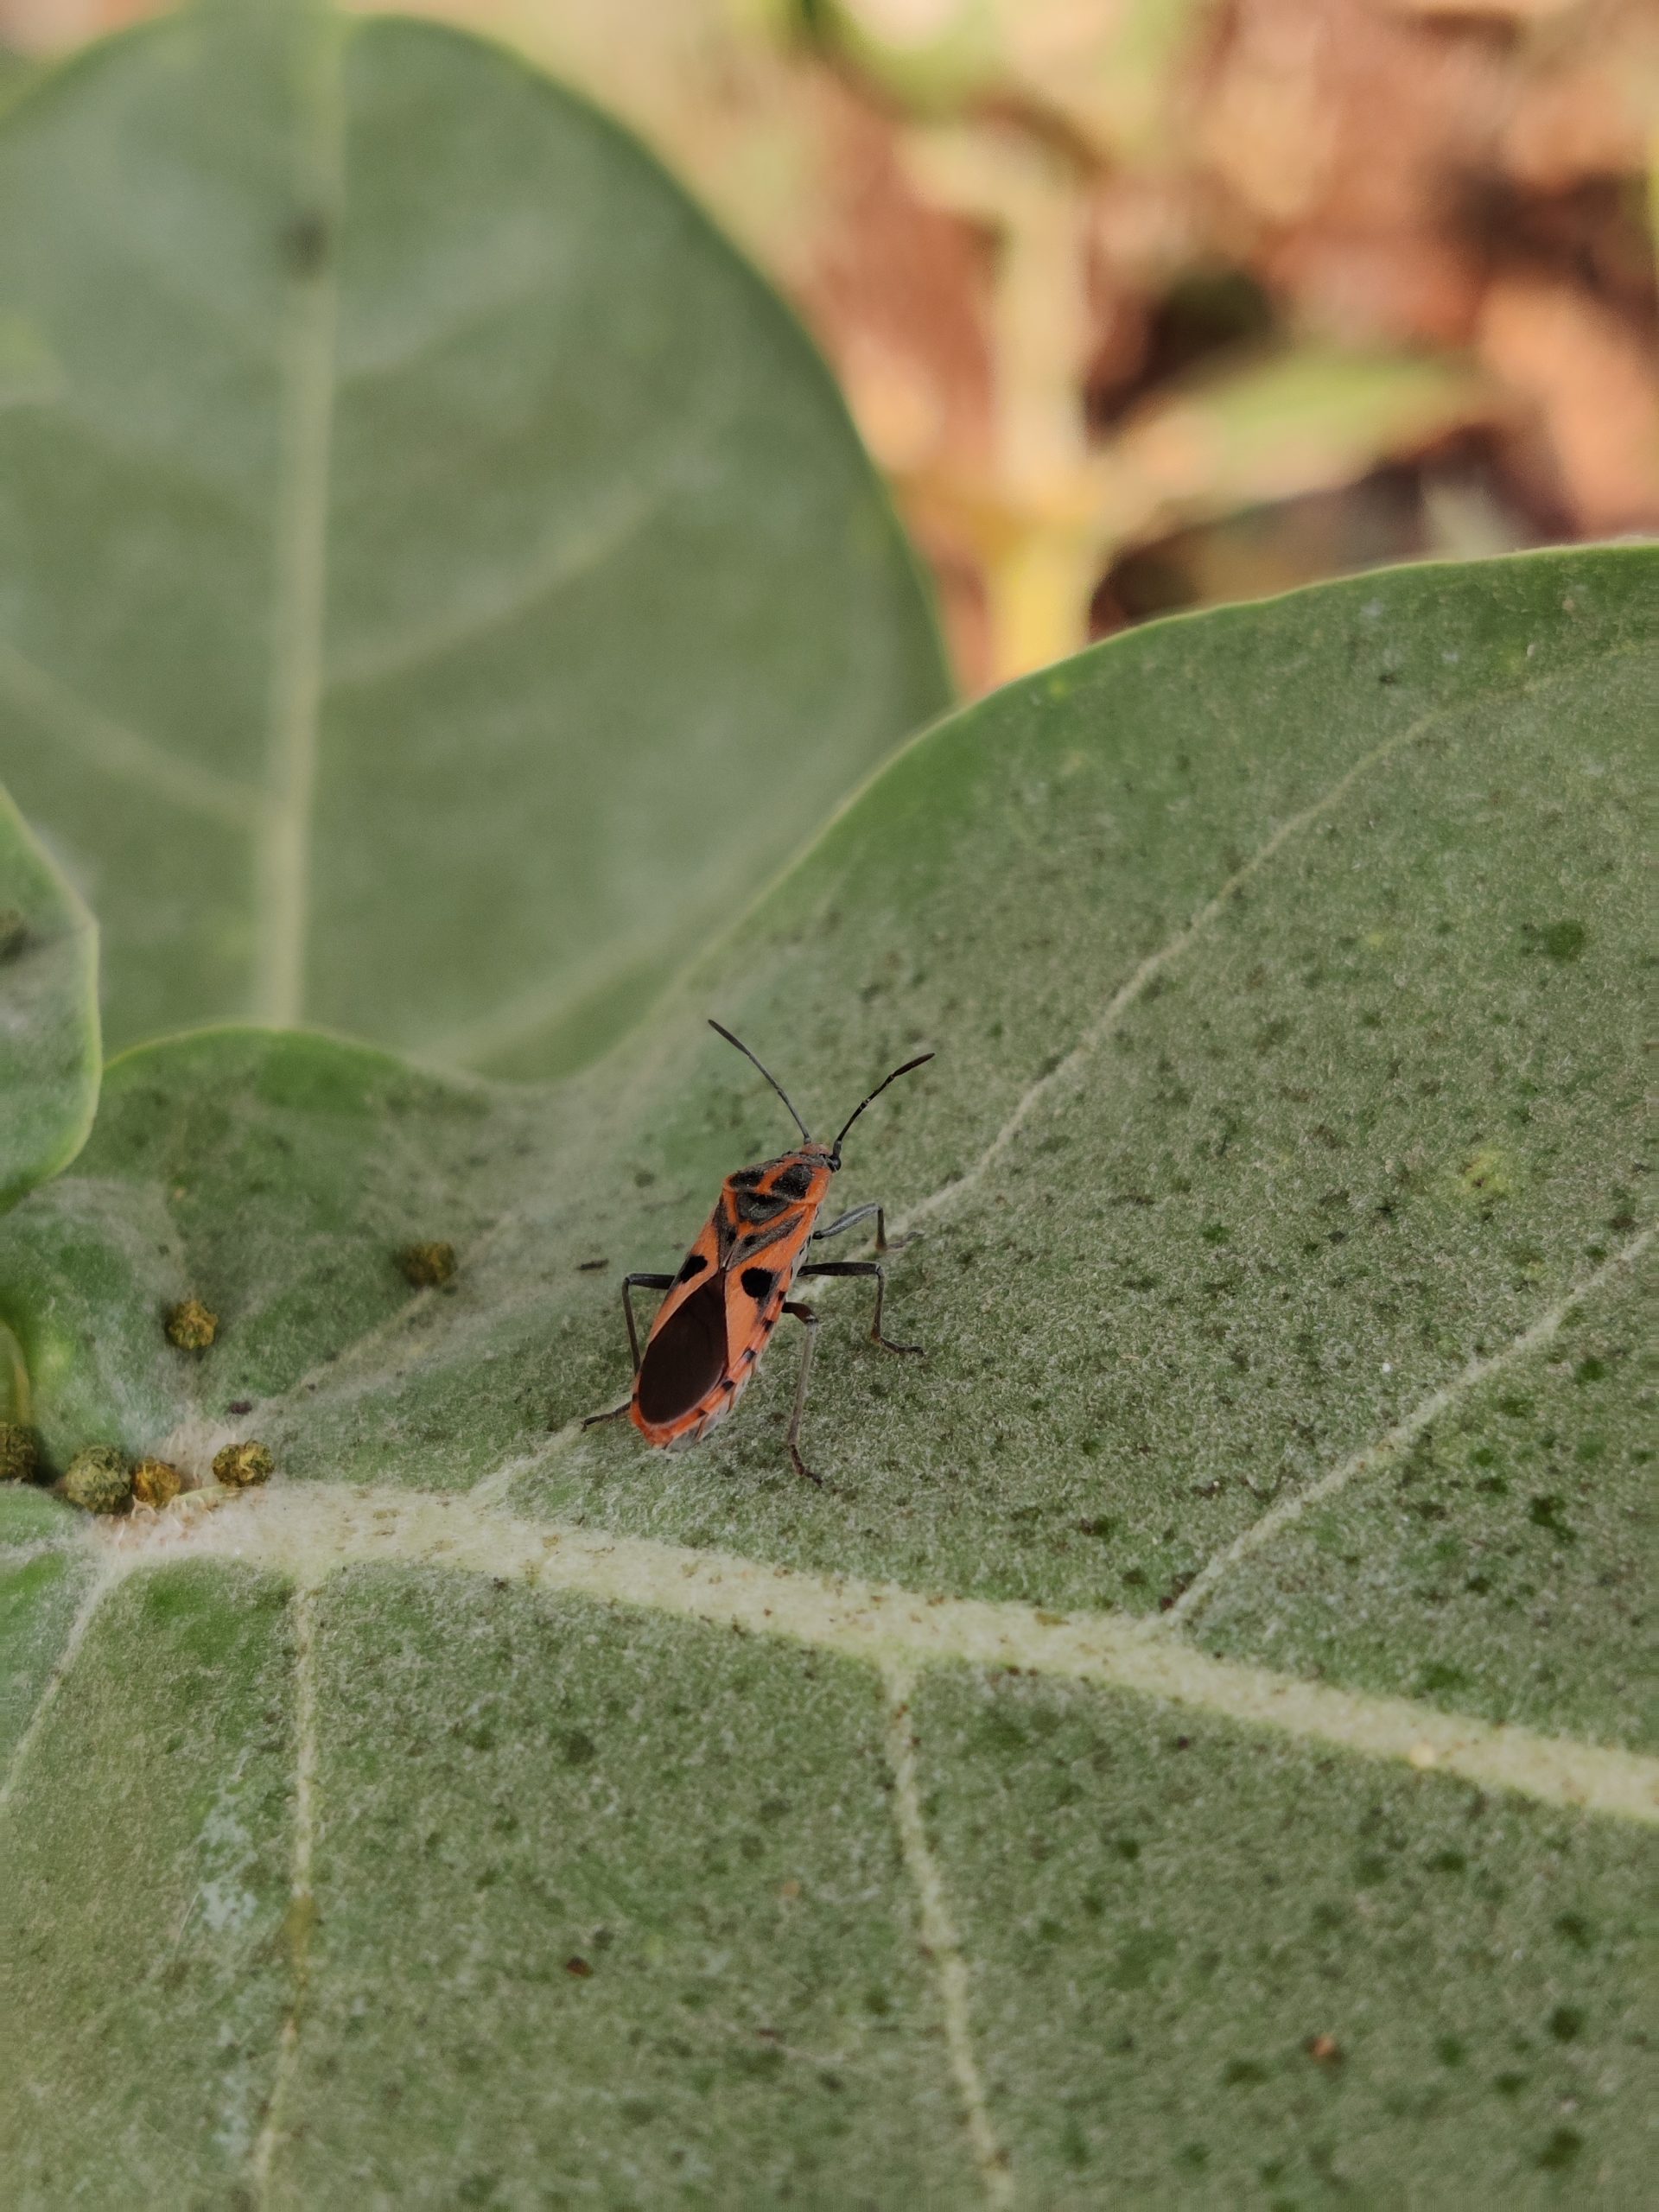 Lygaeus equestris insect on a leaf